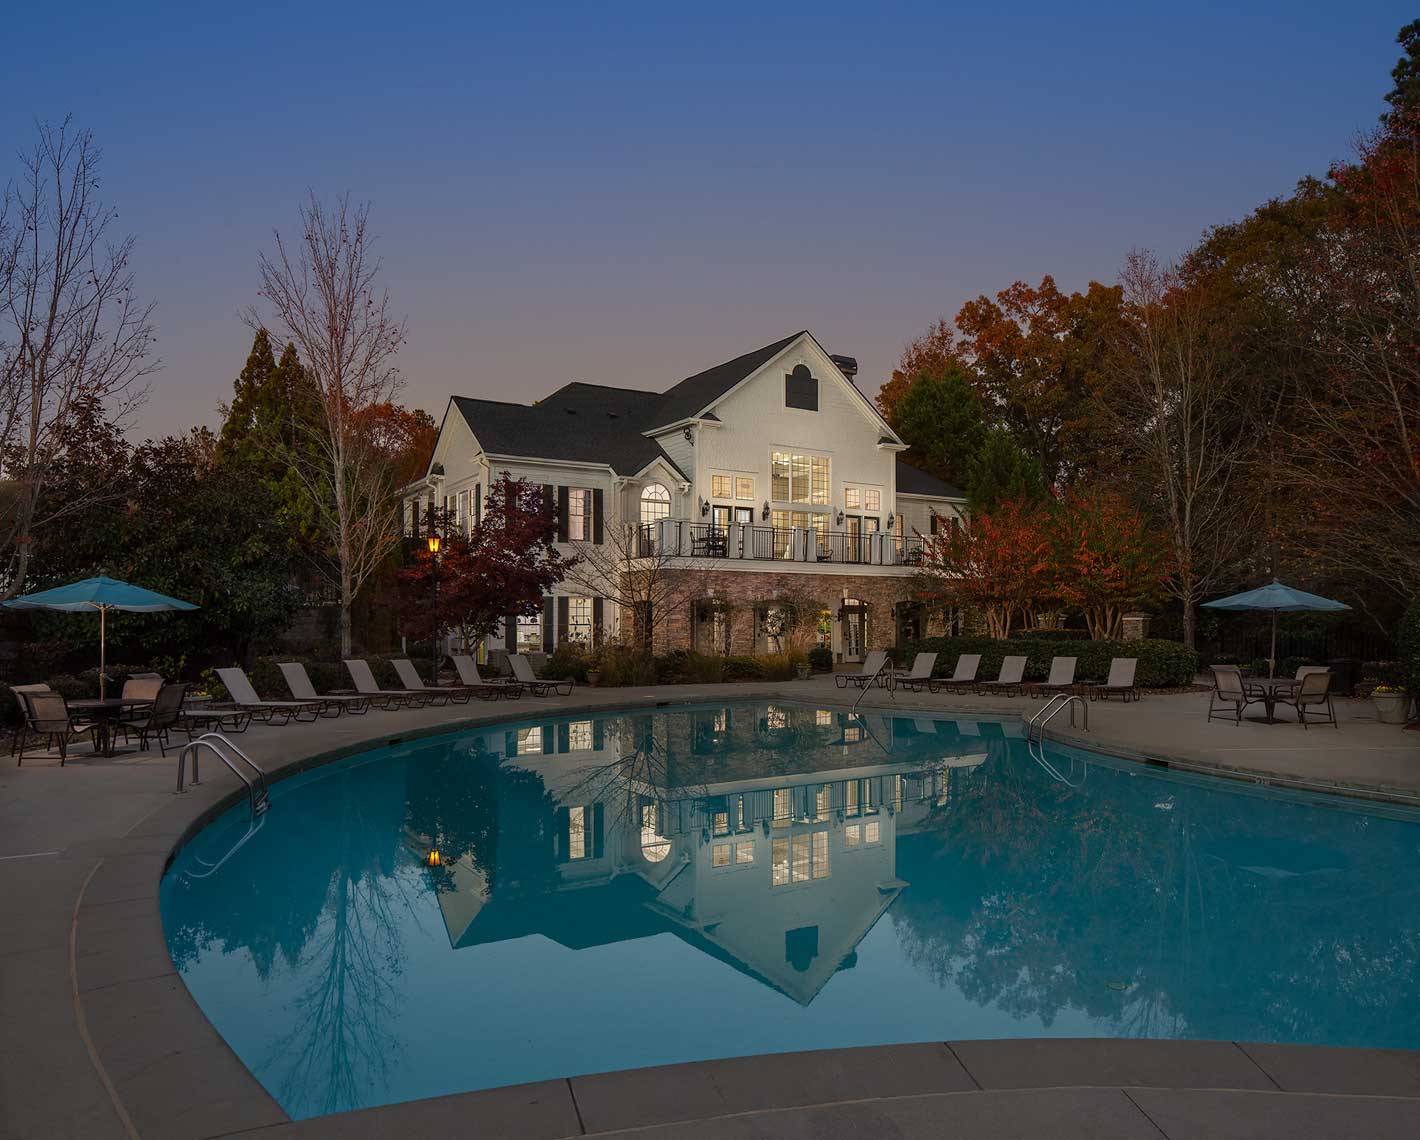 a pool at dusk with a large house in the background